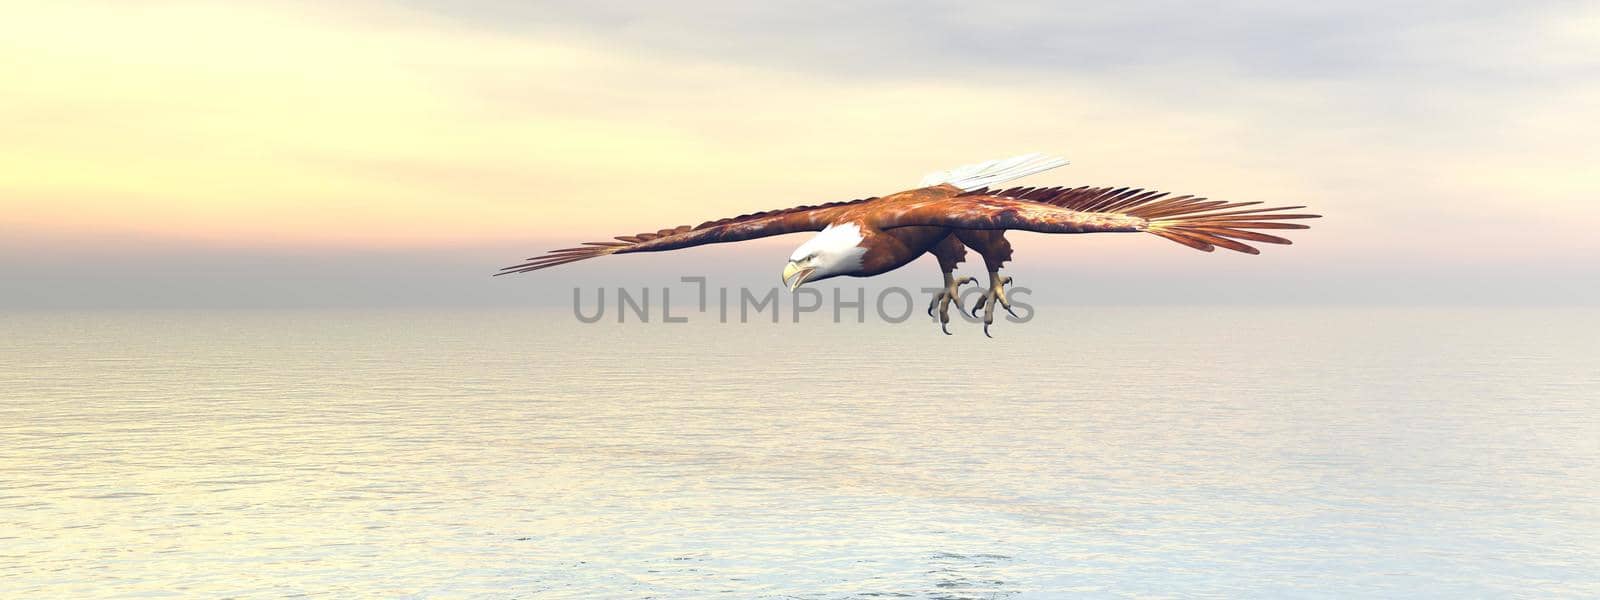 Bald eagle flying - 3D rendering by mariephotos